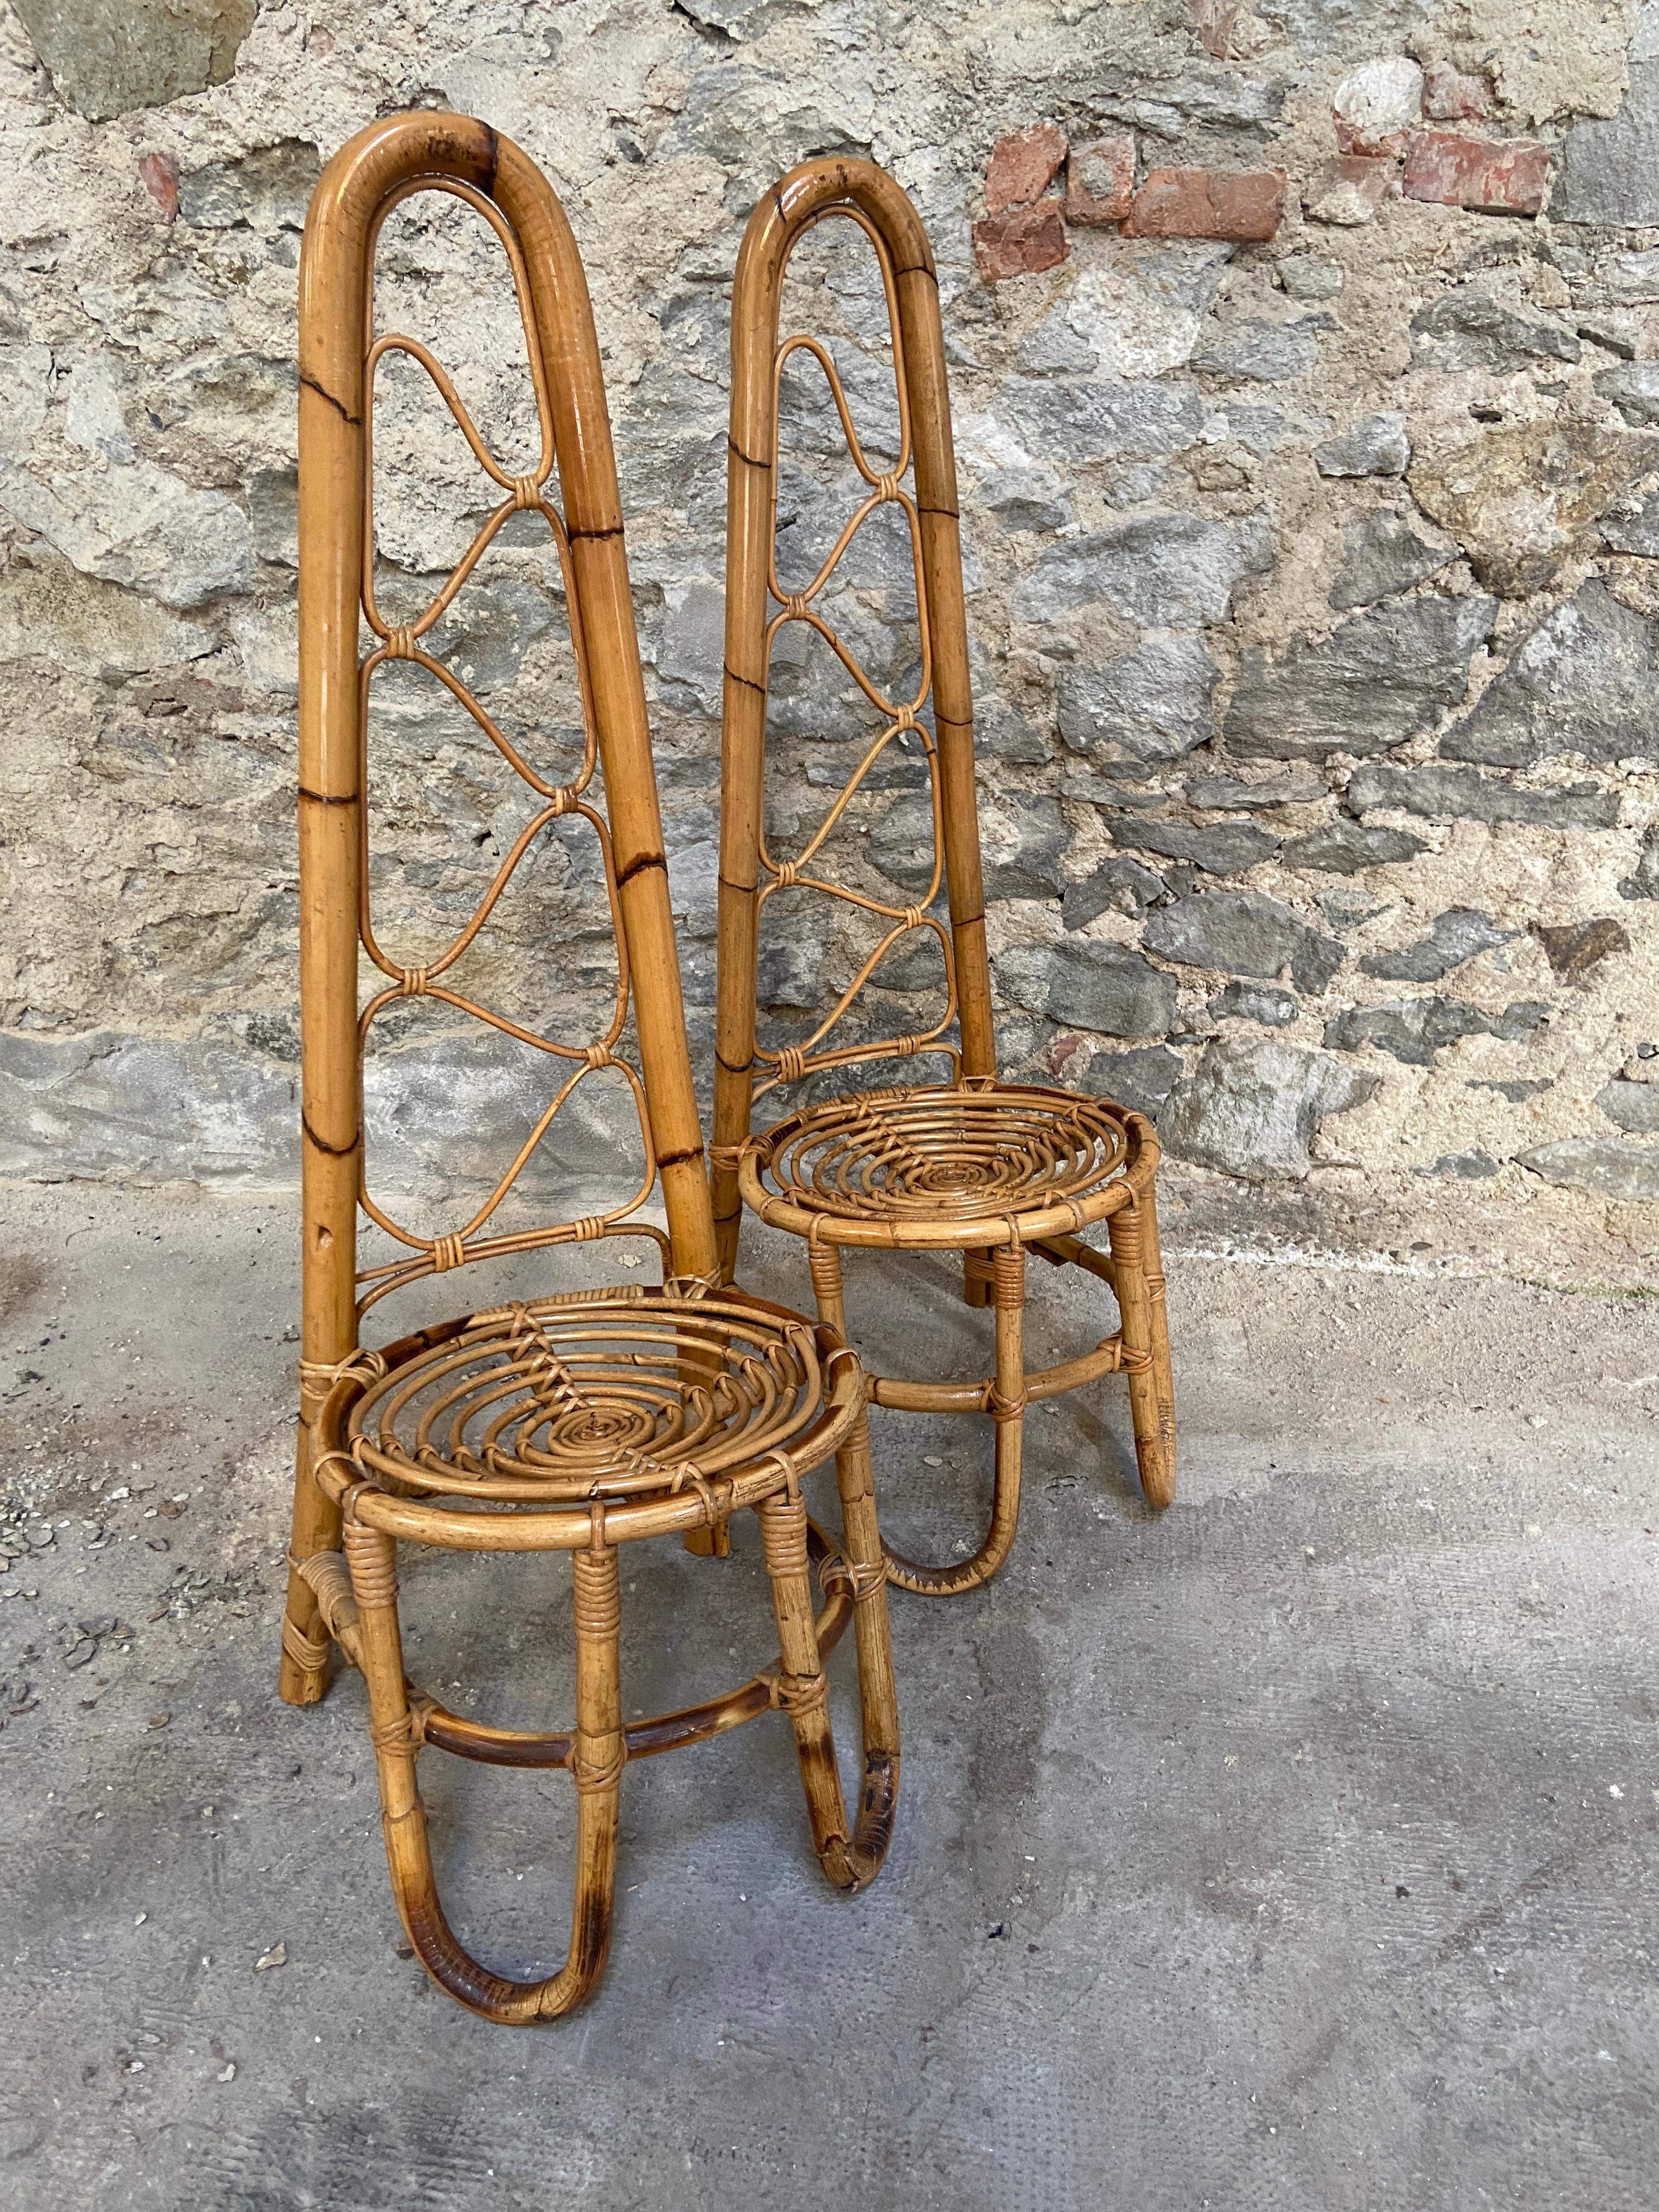 Mid-20th Century Mid-Century Modern Pair of Bamboo and Rattan Chairs from the French Riviera